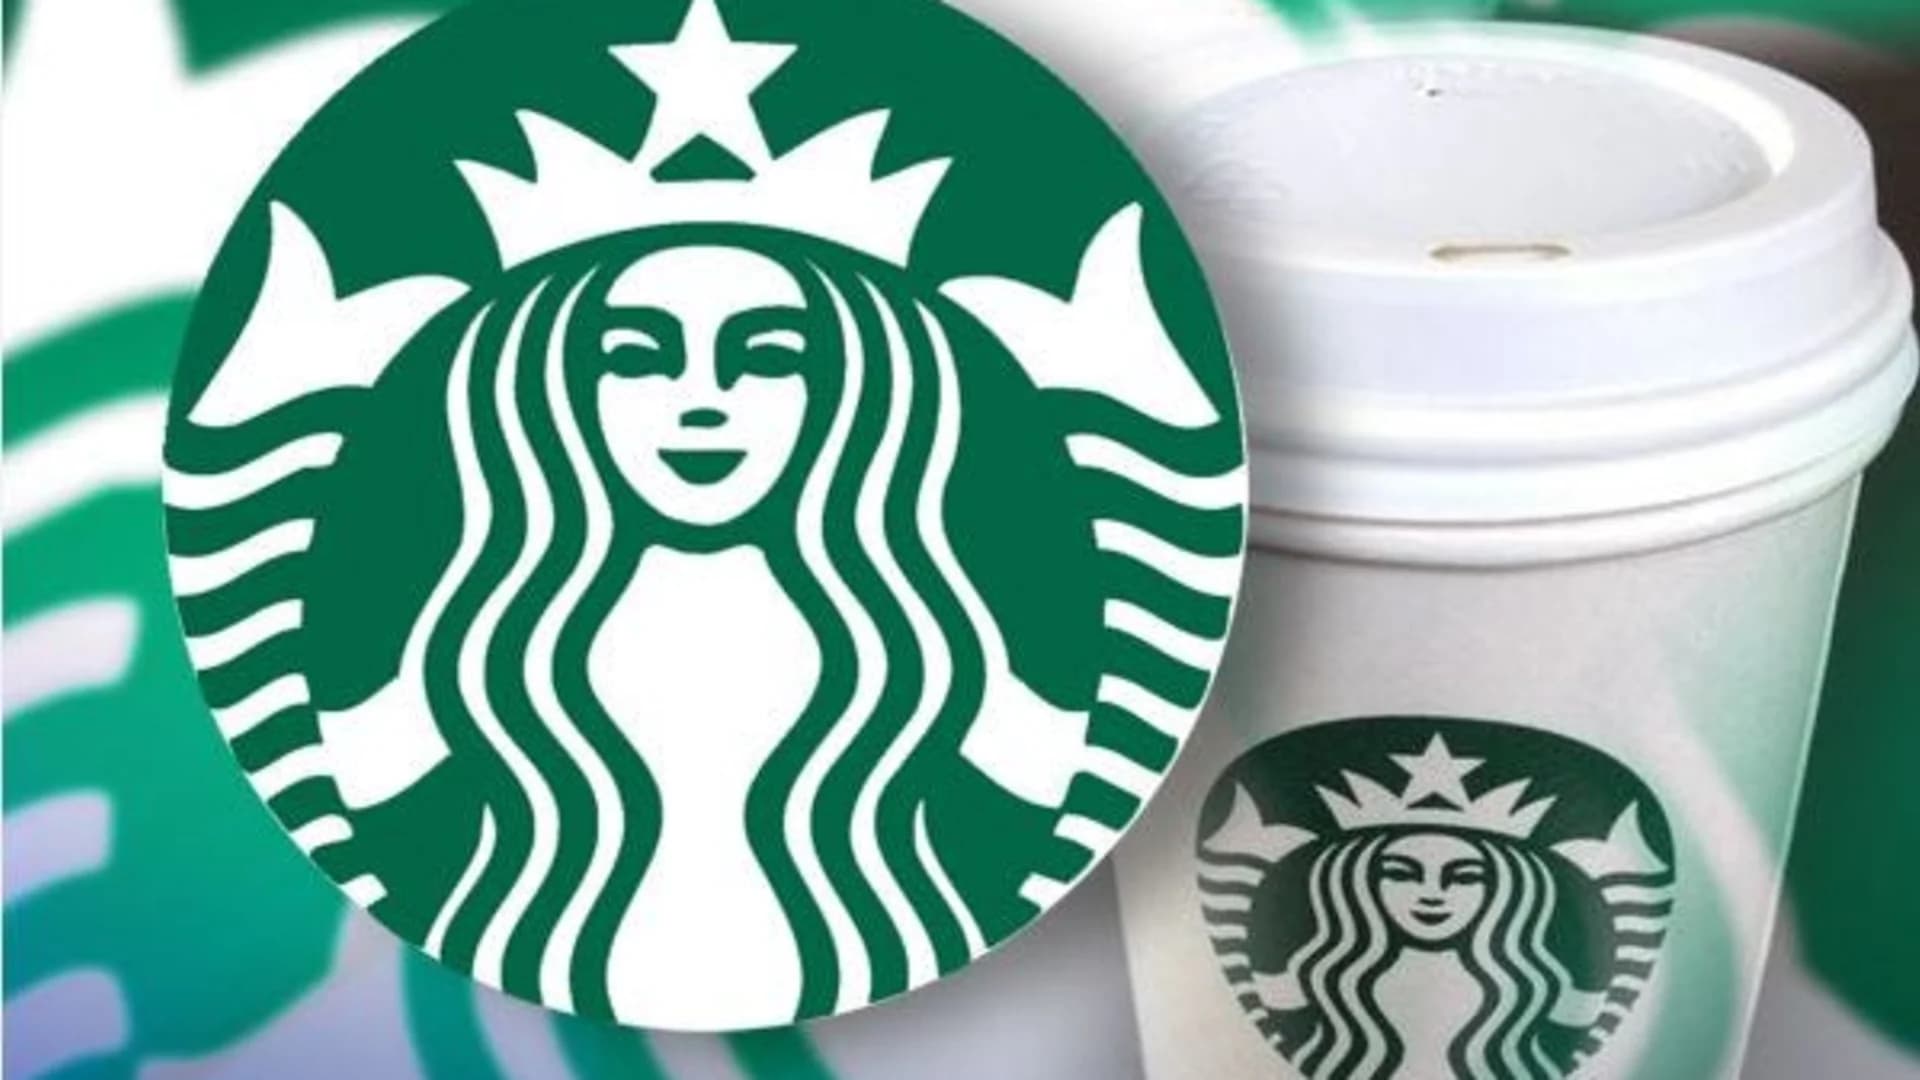 Starbucks to close stores for an afternoon for bias training